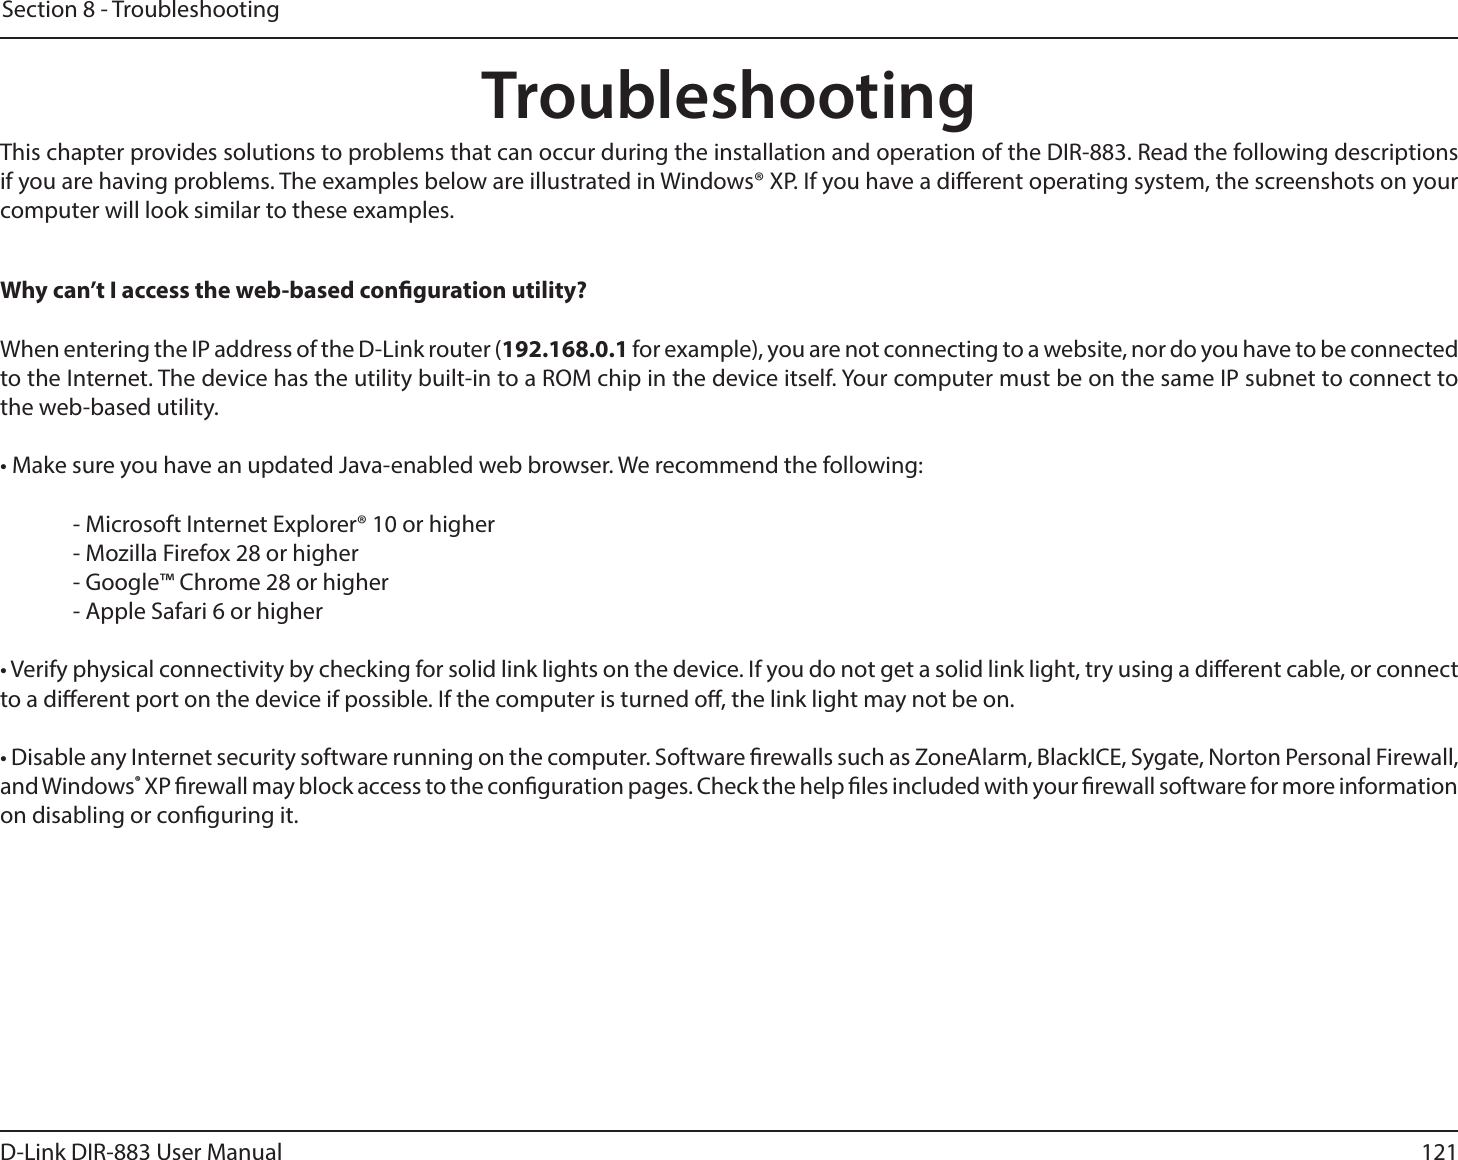 121D-Link DIR-883 User ManualSection 8 - TroubleshootingTroubleshootingThis chapter provides solutions to problems that can occur during the installation and operation of the DIR-883. Read the following descriptions if you are having problems. The examples below are illustrated in Windows® XP. If you have a dierent operating system, the screenshots on your computer will look similar to these examples.Why can’t I access the web-based conguration utility?When entering the IP address of the D-Link router (192.168.0.1 for example), you are not connecting to a website, nor do you have to be connected to the Internet. The device has the utility built-in to a ROM chip in the device itself. Your computer must be on the same IP subnet to connect to the web-based utility. • Make sure you have an updated Java-enabled web browser. We recommend the following:    - Microsoft Internet Explorer® 10 or higher  - Mozilla Firefox 28 or higher  - Google™ Chrome 28 or higher  - Apple Safari 6 or higher• Verify physical connectivity by checking for solid link lights on the device. If you do not get a solid link light, try using a dierent cable, or connect to a dierent port on the device if possible. If the computer is turned o, the link light may not be on.• Disable any Internet security software running on the computer. Software rewalls such as ZoneAlarm, BlackICE, Sygate, Norton Personal Firewall, and Windows® XP rewall may block access to the conguration pages. Check the help les included with your rewall software for more information on disabling or conguring it.